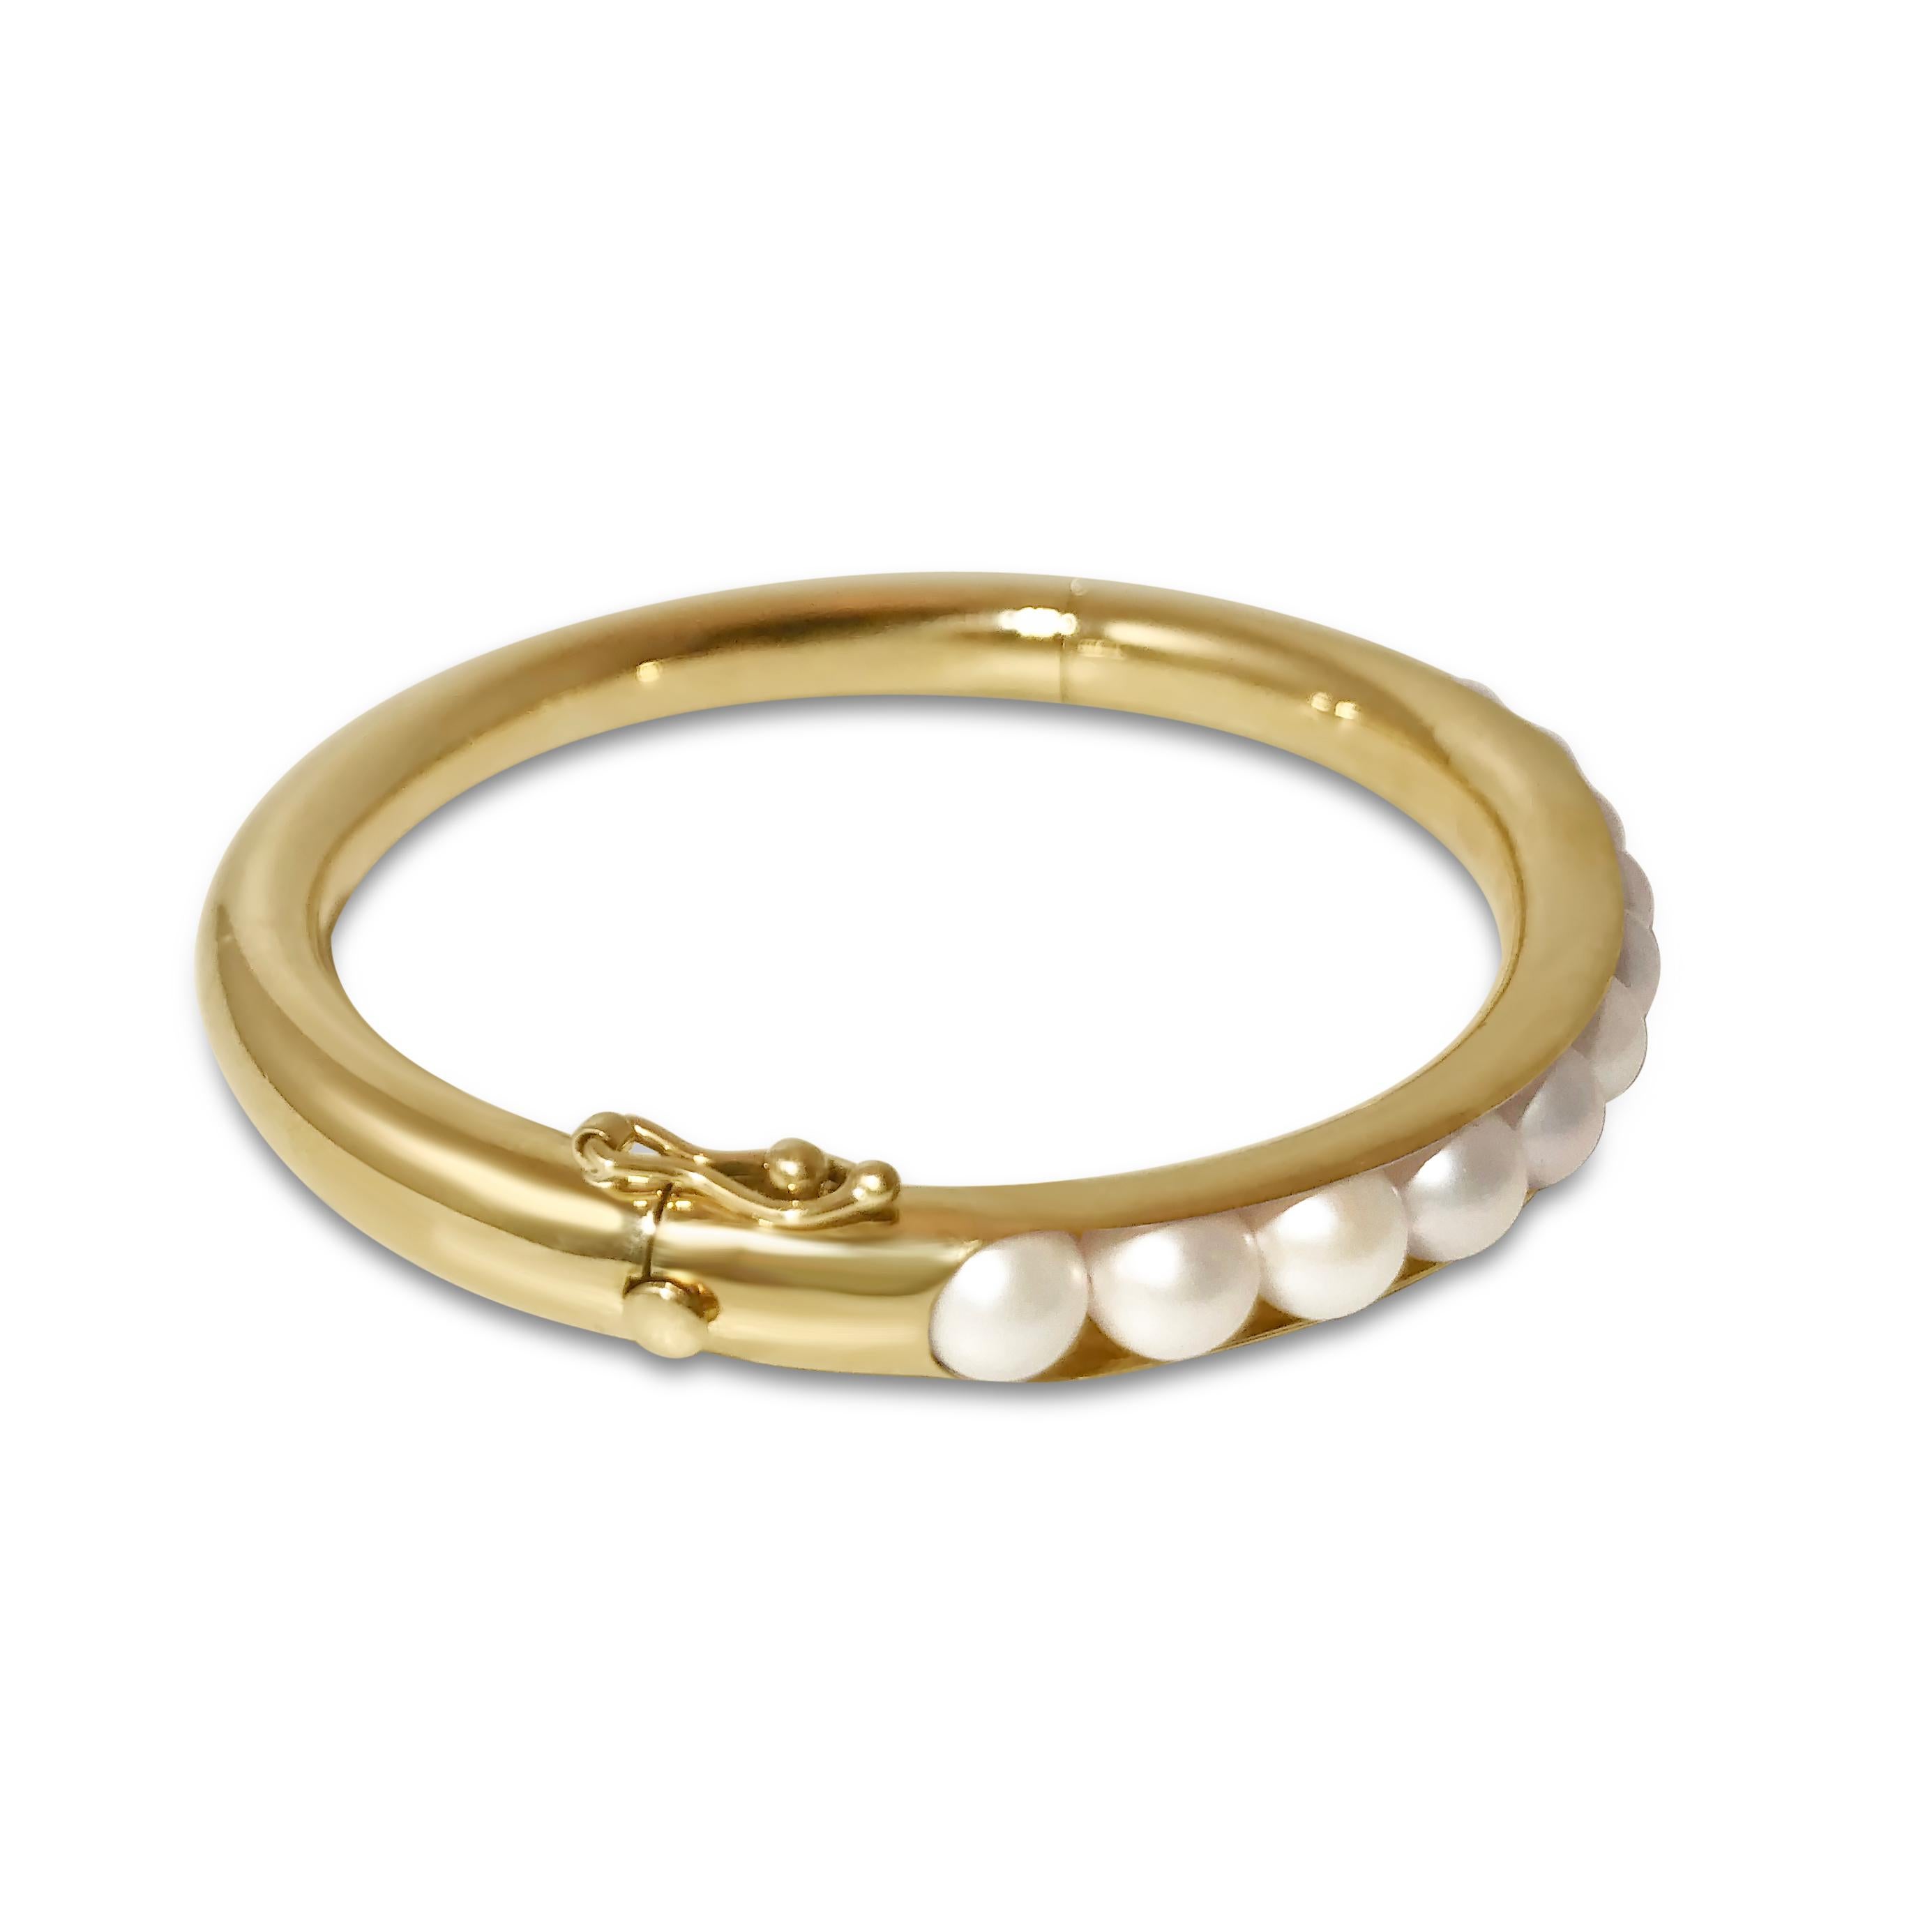 Modern meets classic with our gold bangle with inlayed semi-precious pearls. Our ‘T-Pearl’ 14K yellow gold oval-shaped bracelet is ¼ inch in width and securely closes with a snap & hinge.

Specifications:
- Stone(s): Pearl
- Shape: Oval
- Dimension: